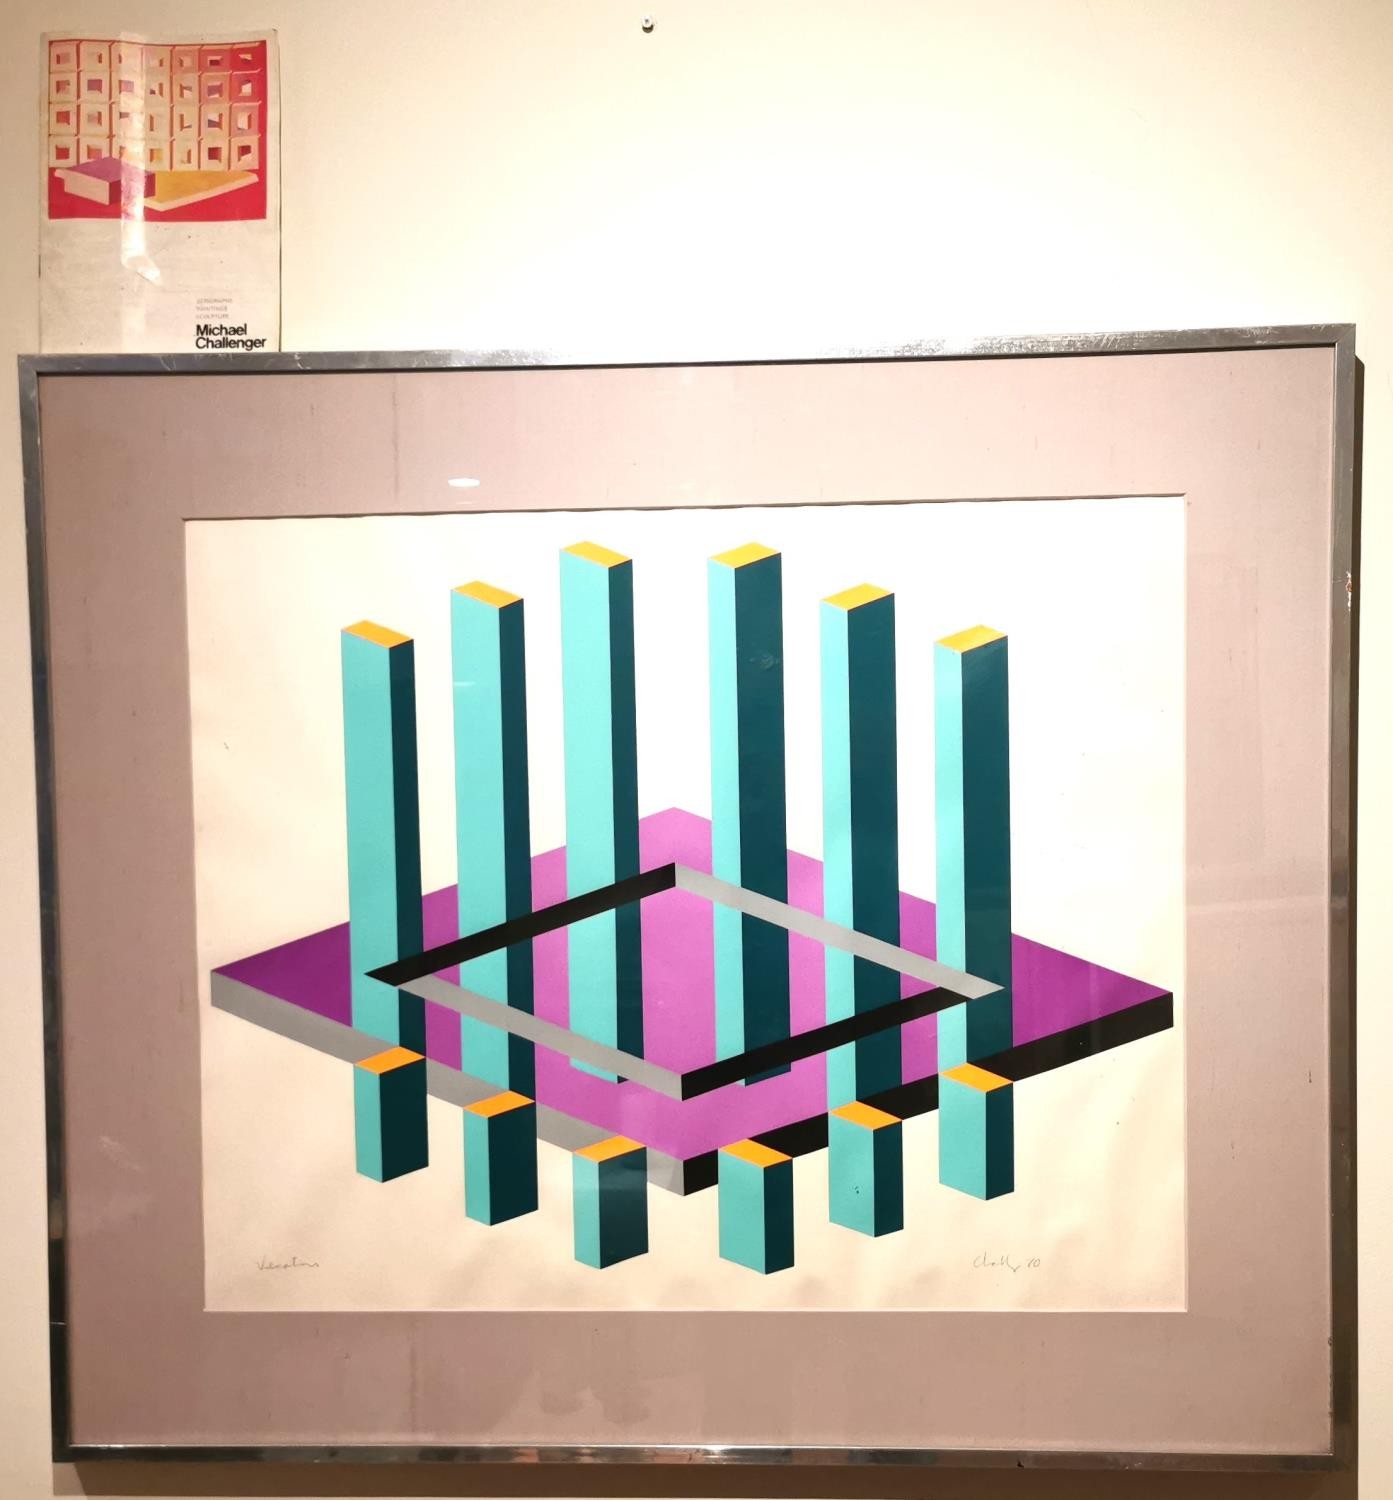 Michael Challenger, British (1939-), 'Vexations', screen-print of an optical illusion. Signed and - Image 2 of 11